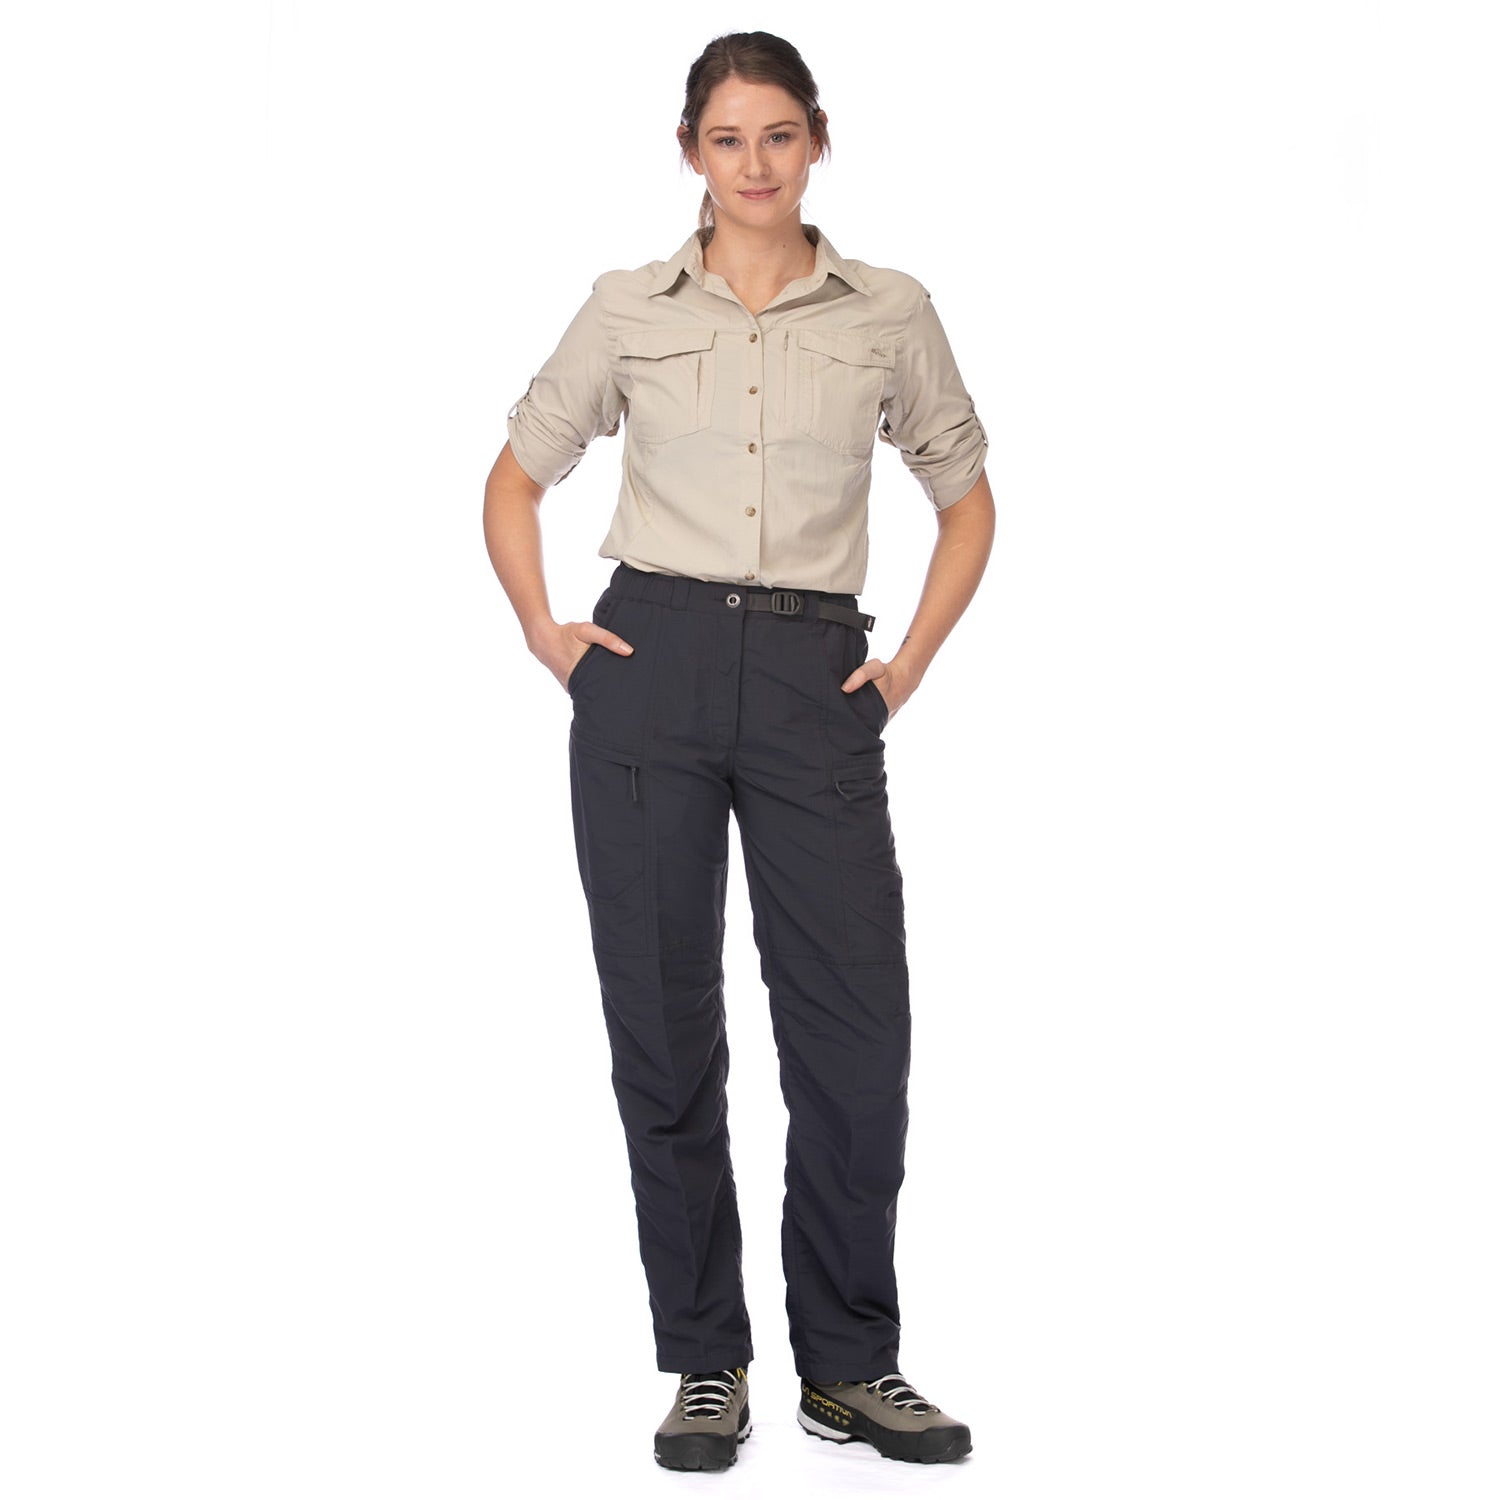 Women's Hiking Capris Lightweight Stretch Water Resistant Joggers with 5  Pockets for Outdoor